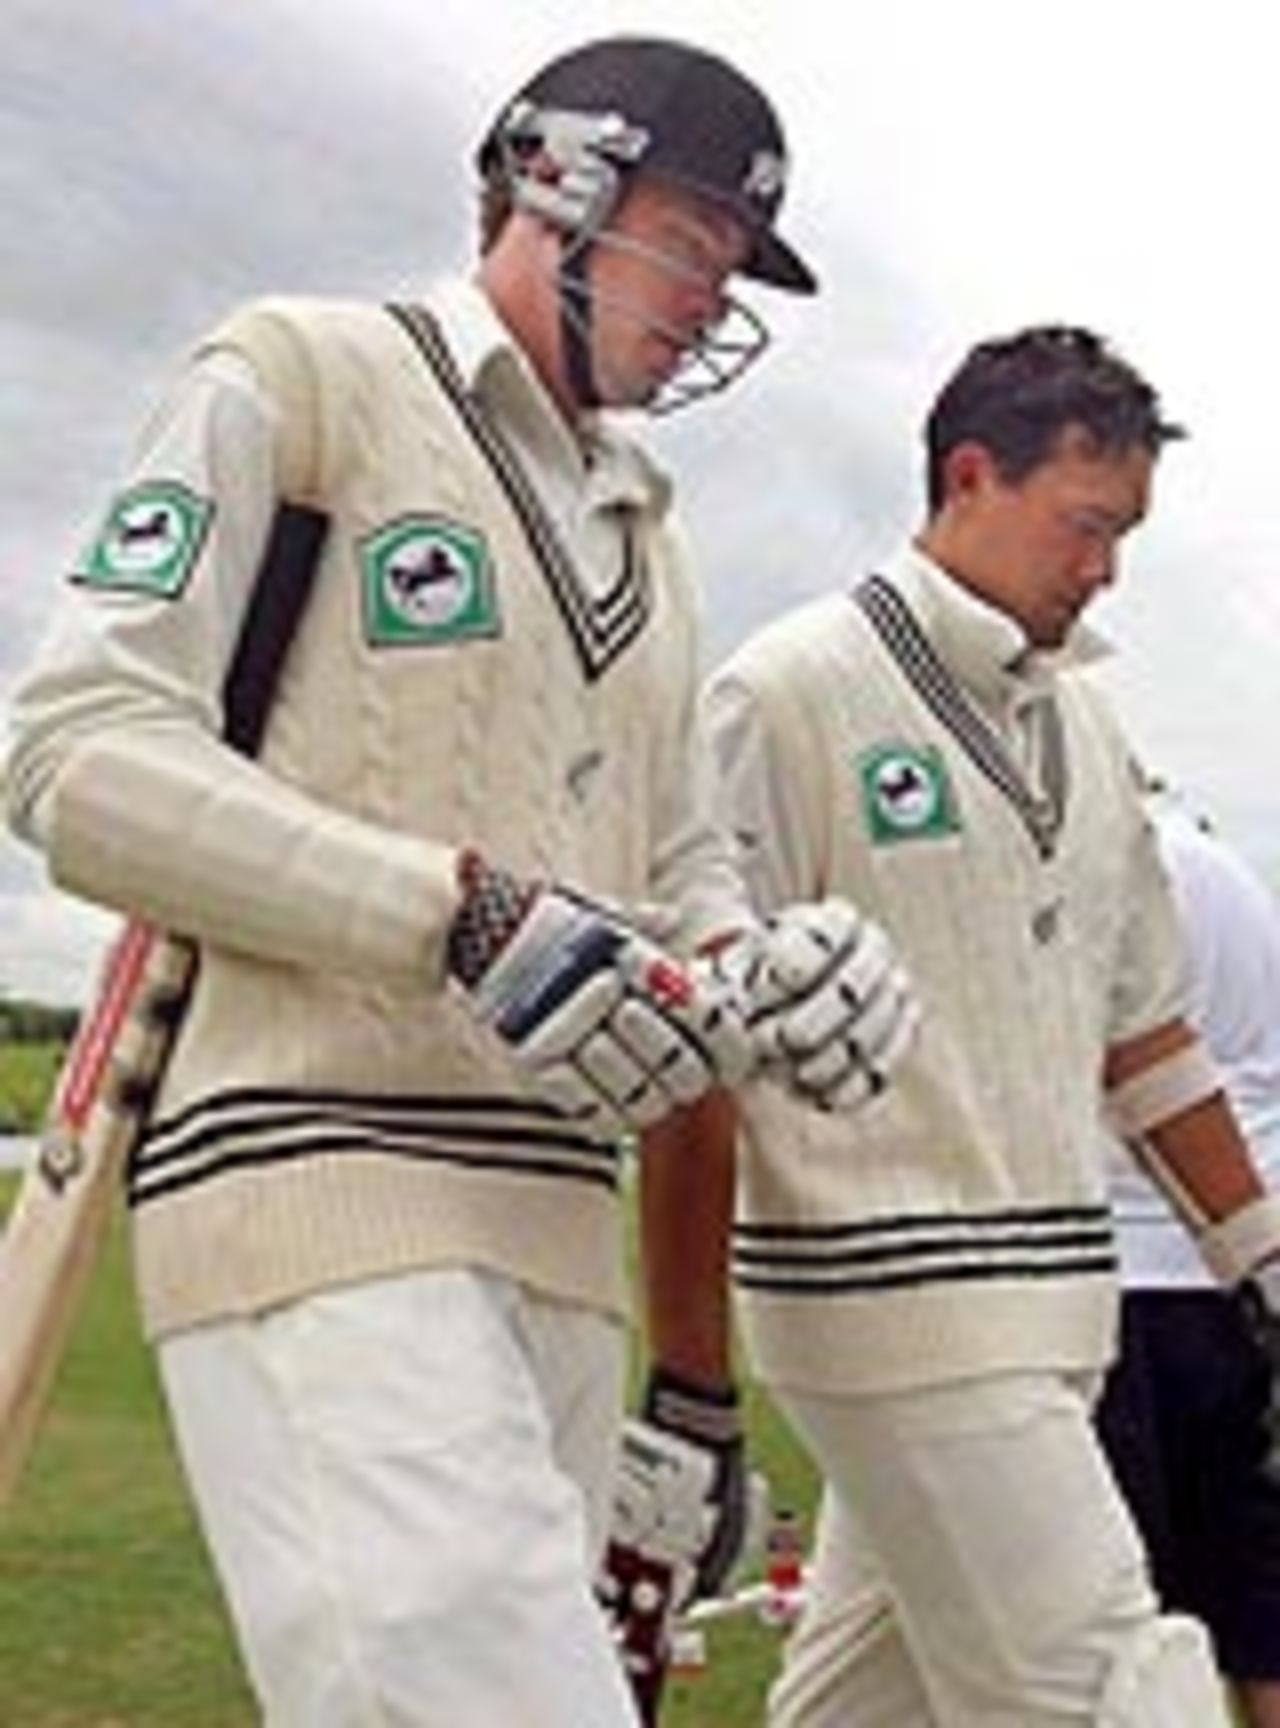 Jacob Oram and Daryl Tuffey walk off the field as the weather comes to New Zealand's rescue, New Zealand v Pakistan, 1st Test, Hamilton, 5th day, December 23, 2003